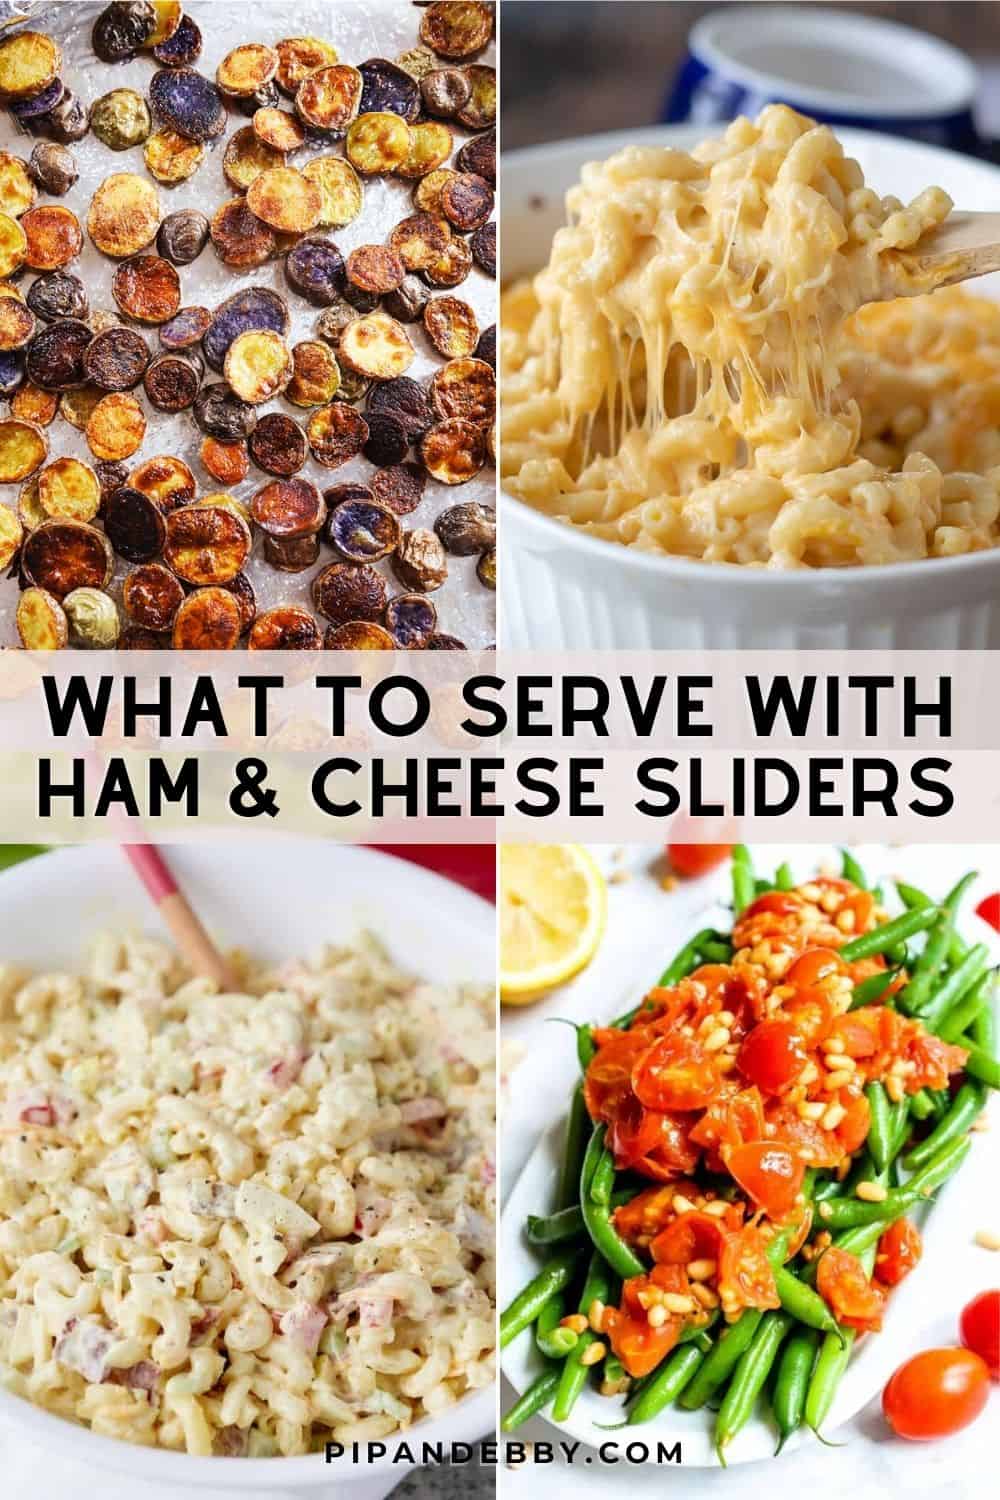 Four food images with text overlay reading, "What to serve with ham and cheese sliders."